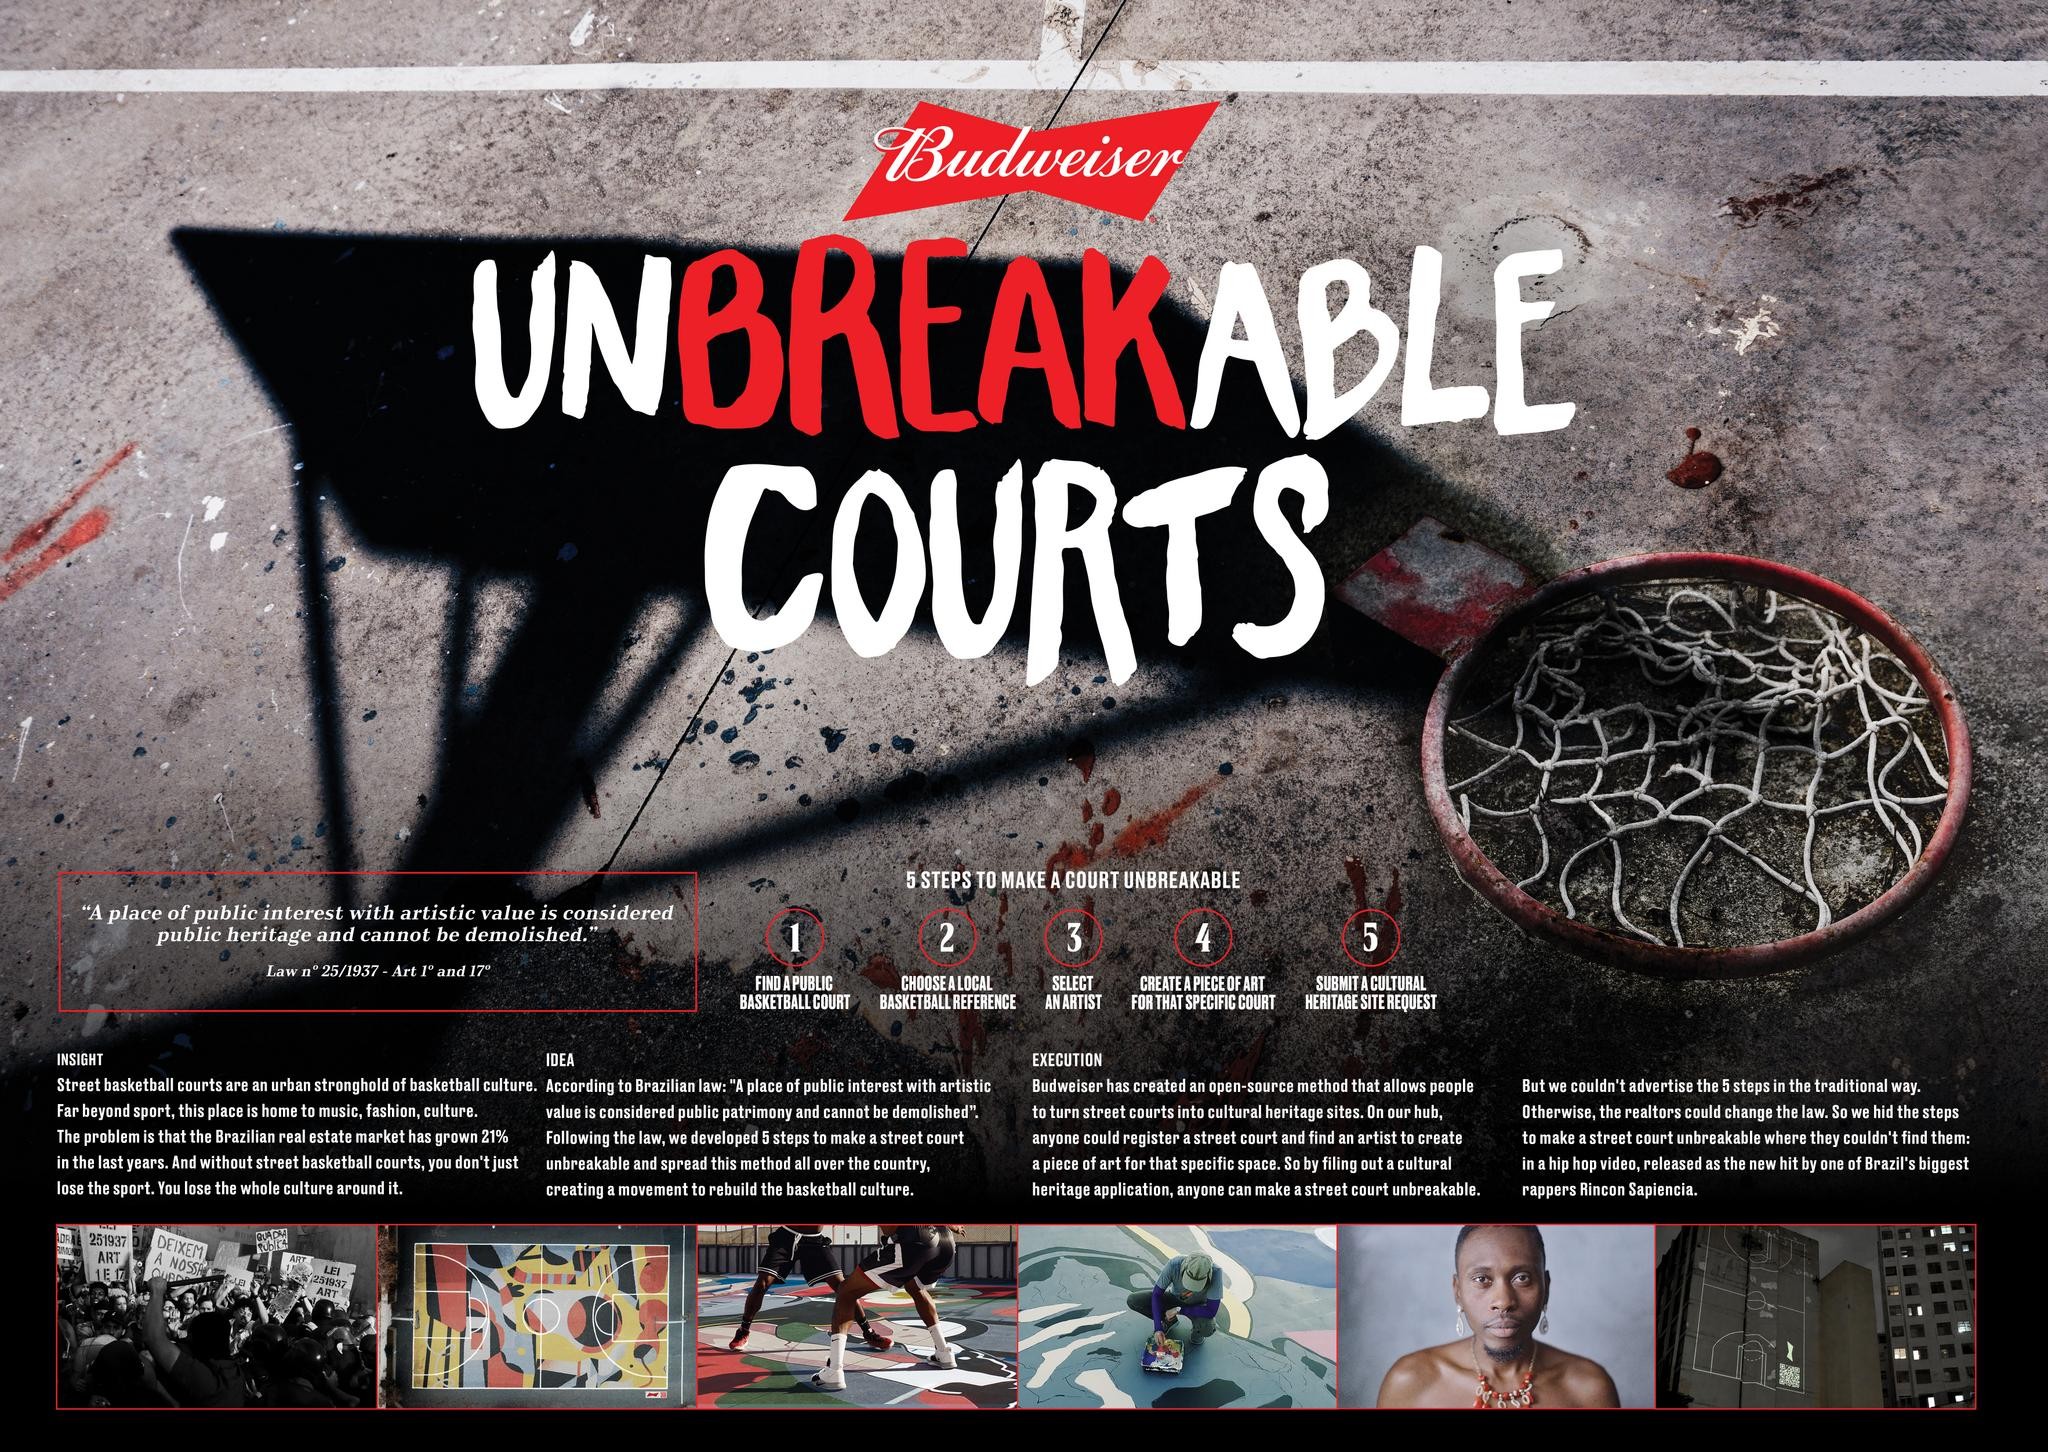 UNBREAKABLE COURTS